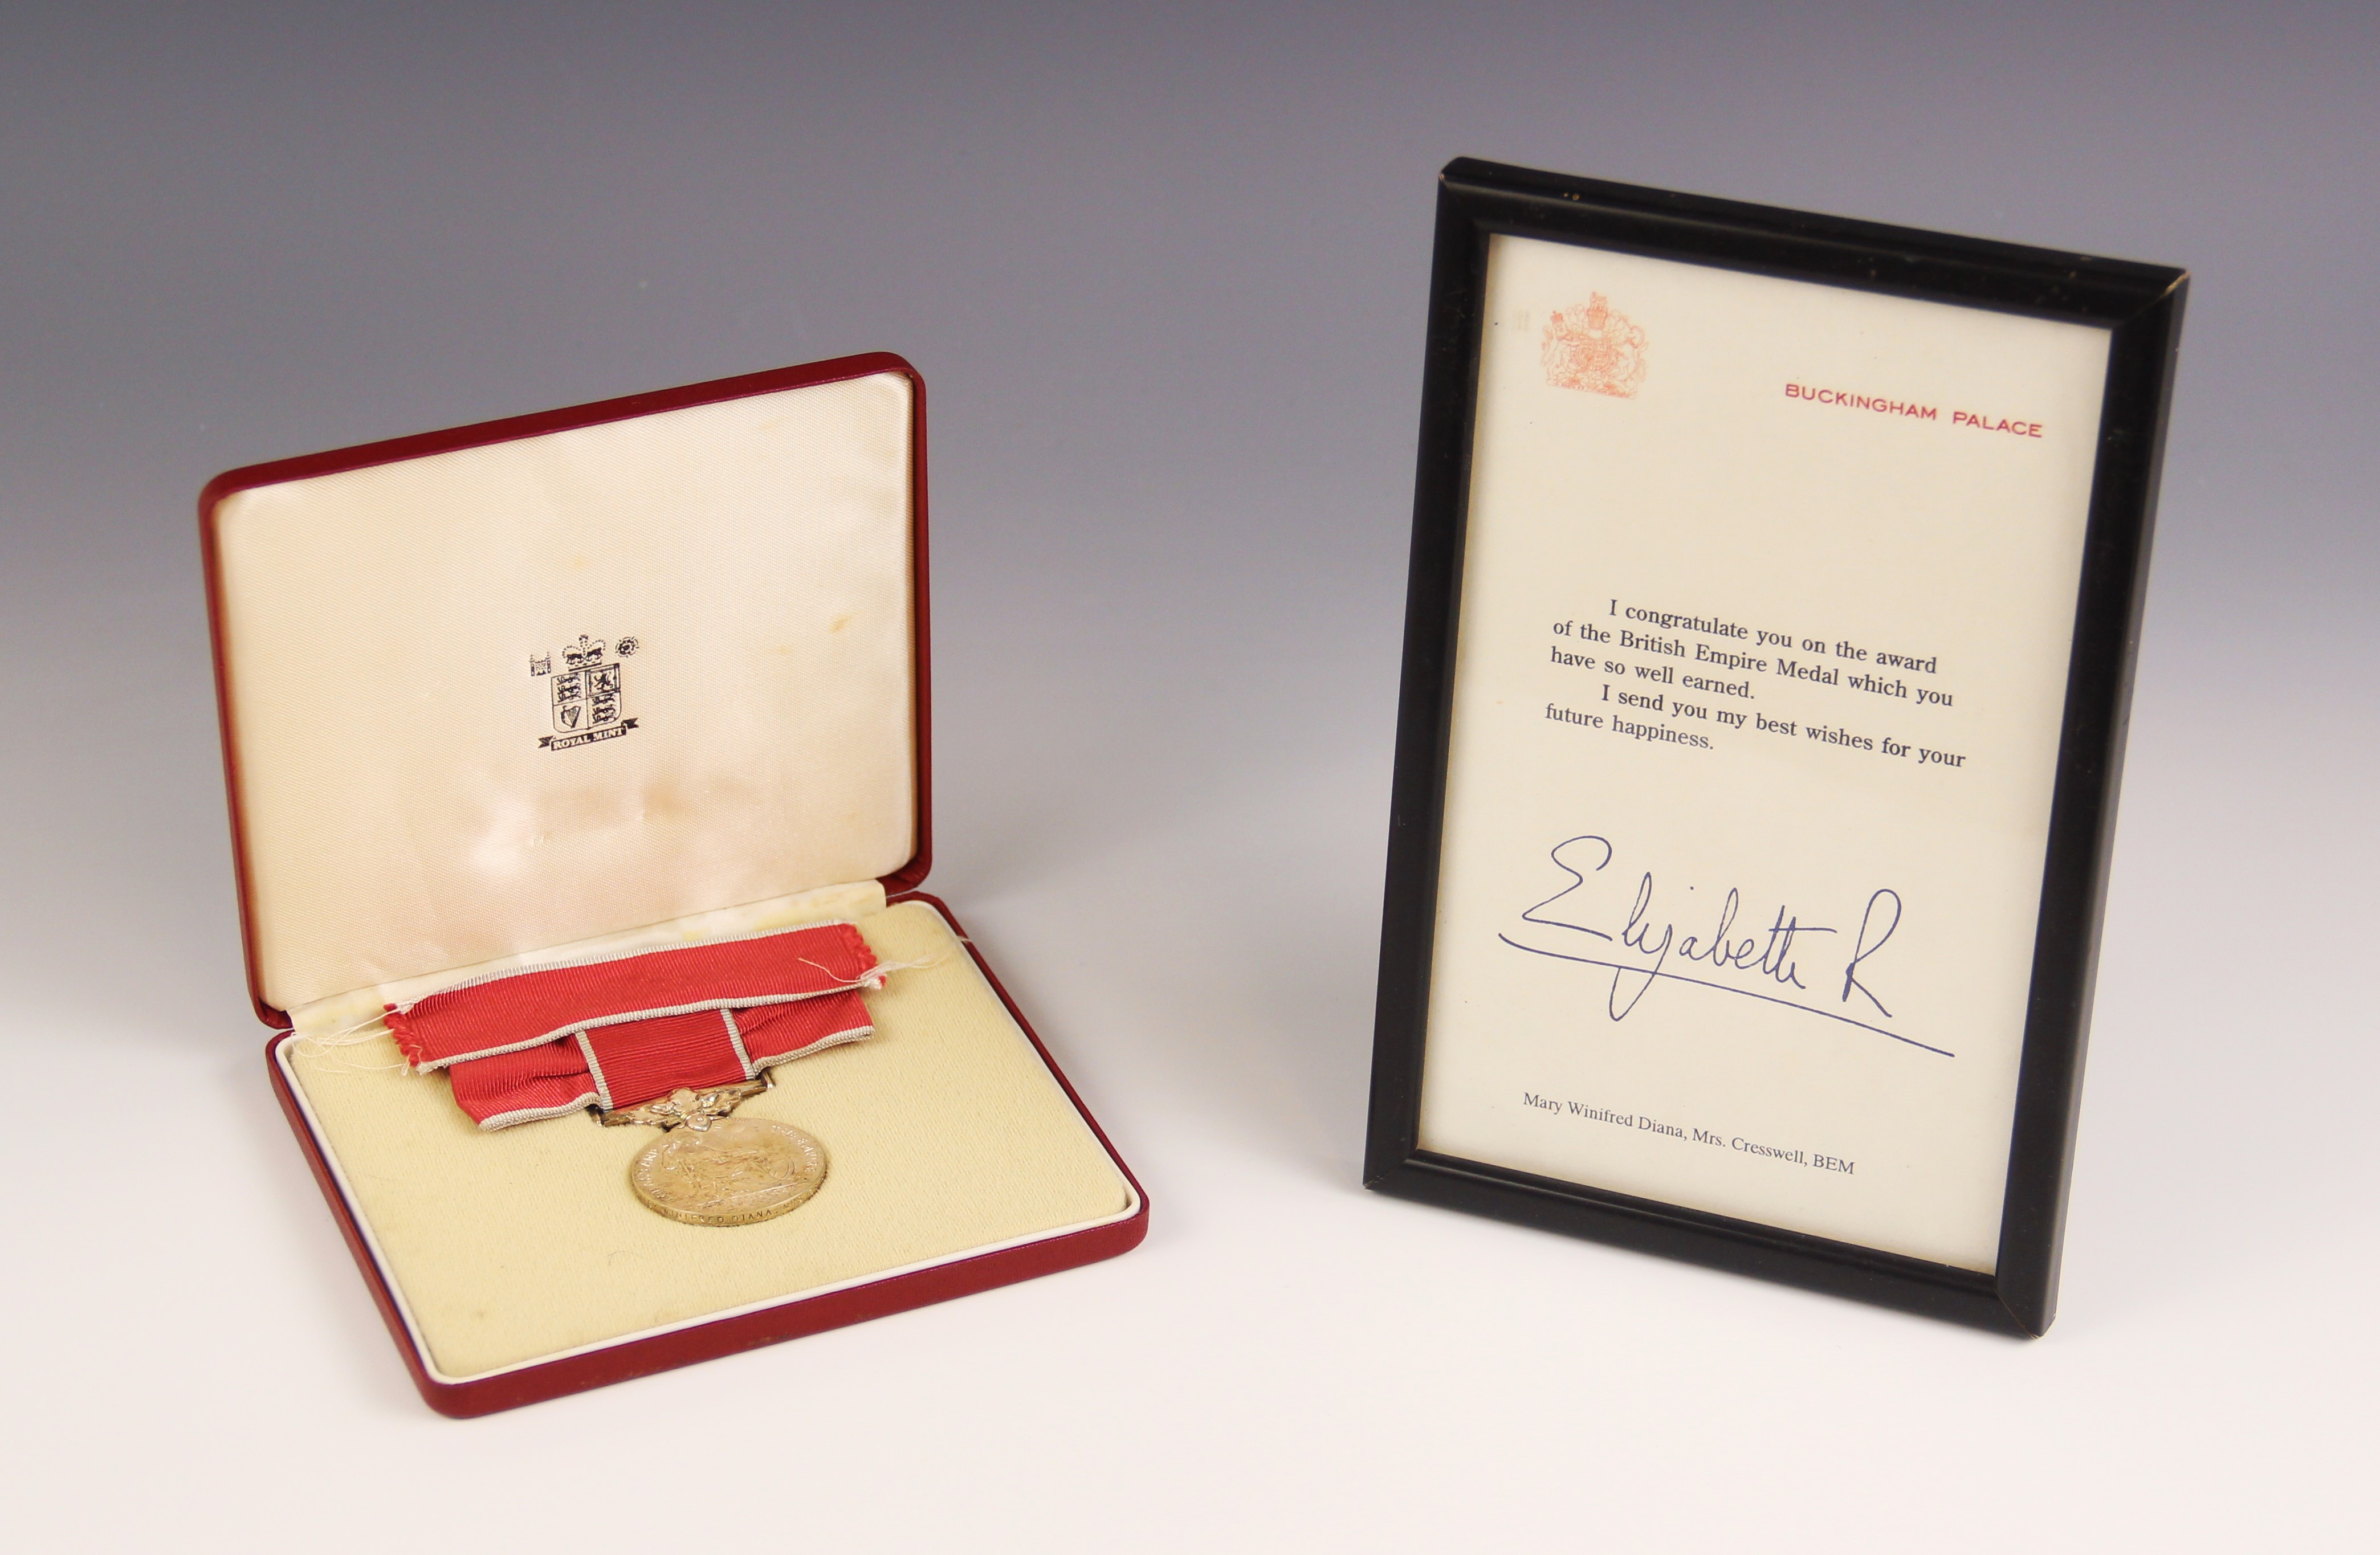 A post-war Civil Division EIIR British Empire Medal to Mrs Mary Winifred Diana Creswell, in original